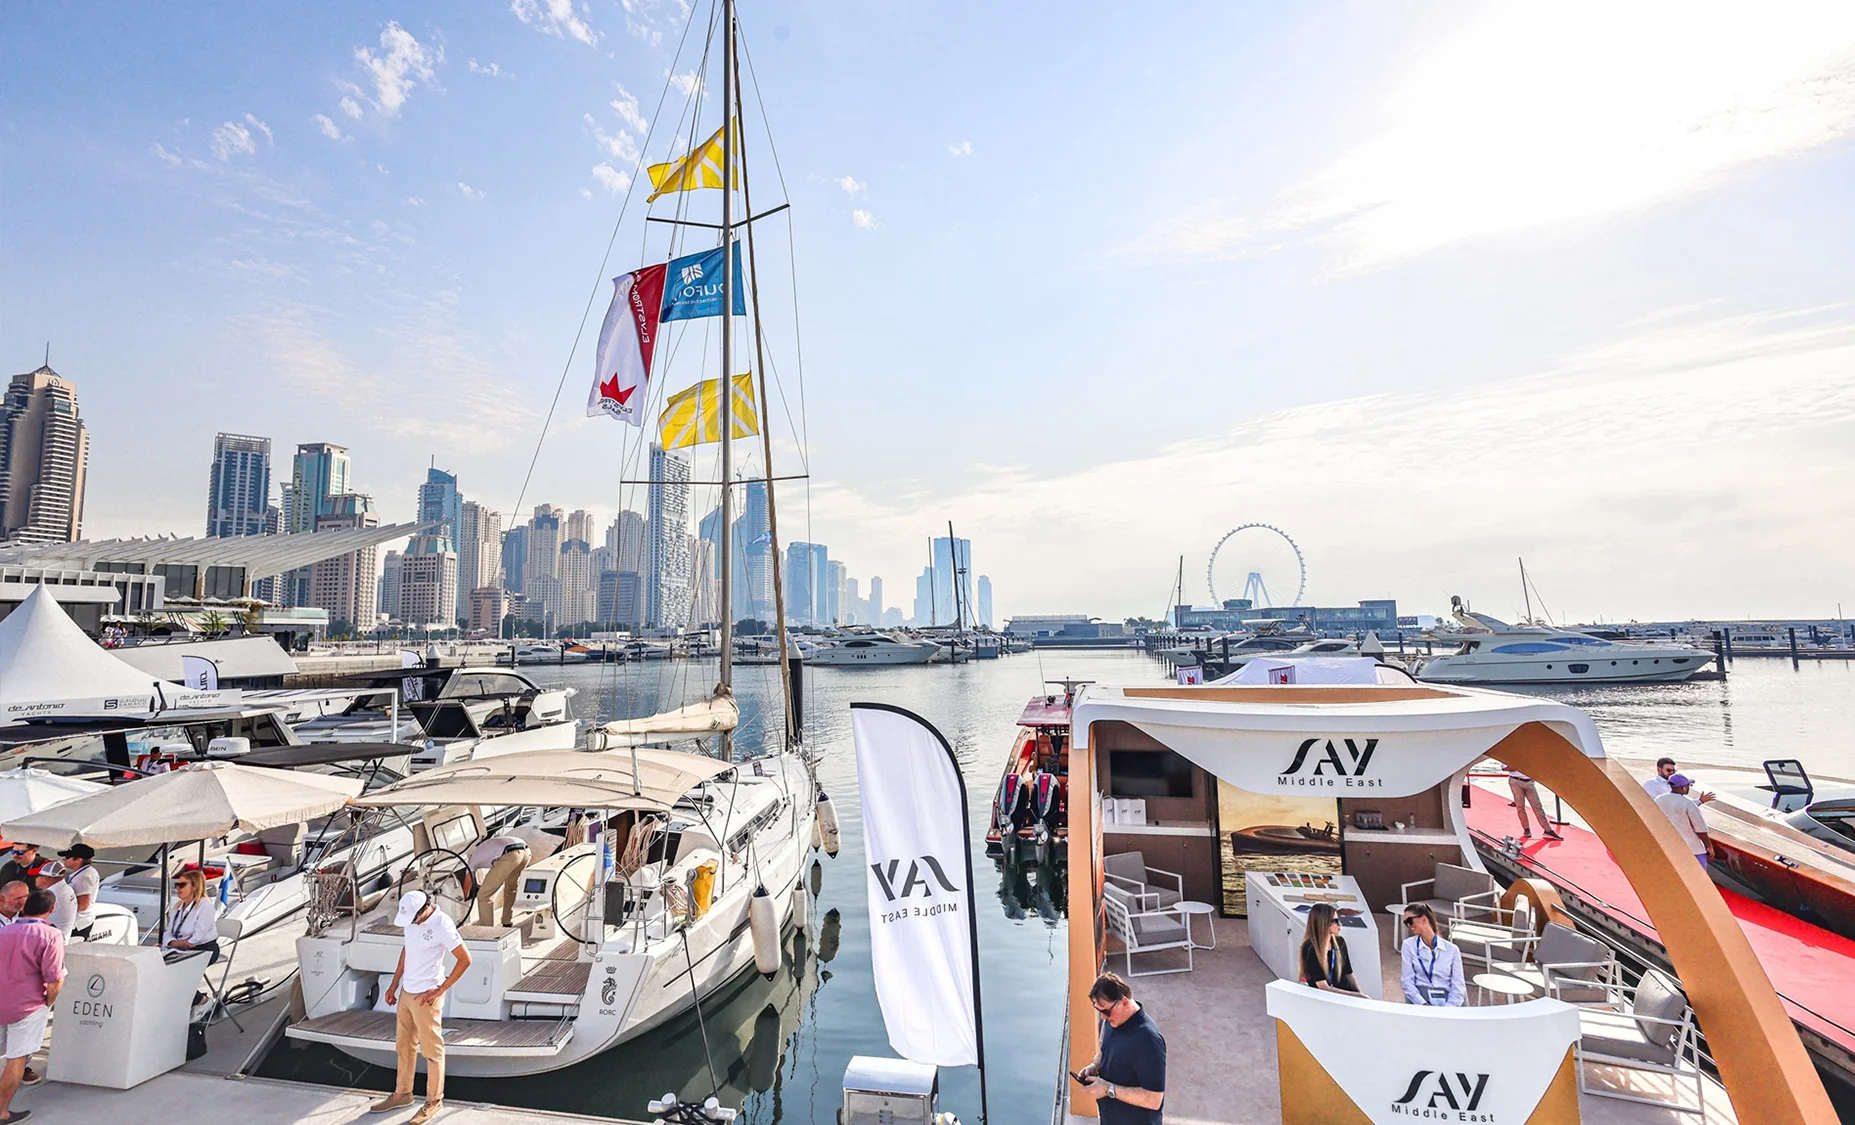 Dubai International Boat Show Set To Begin Its Maritime Showcase With Raft of Exciting Activities for Visitors